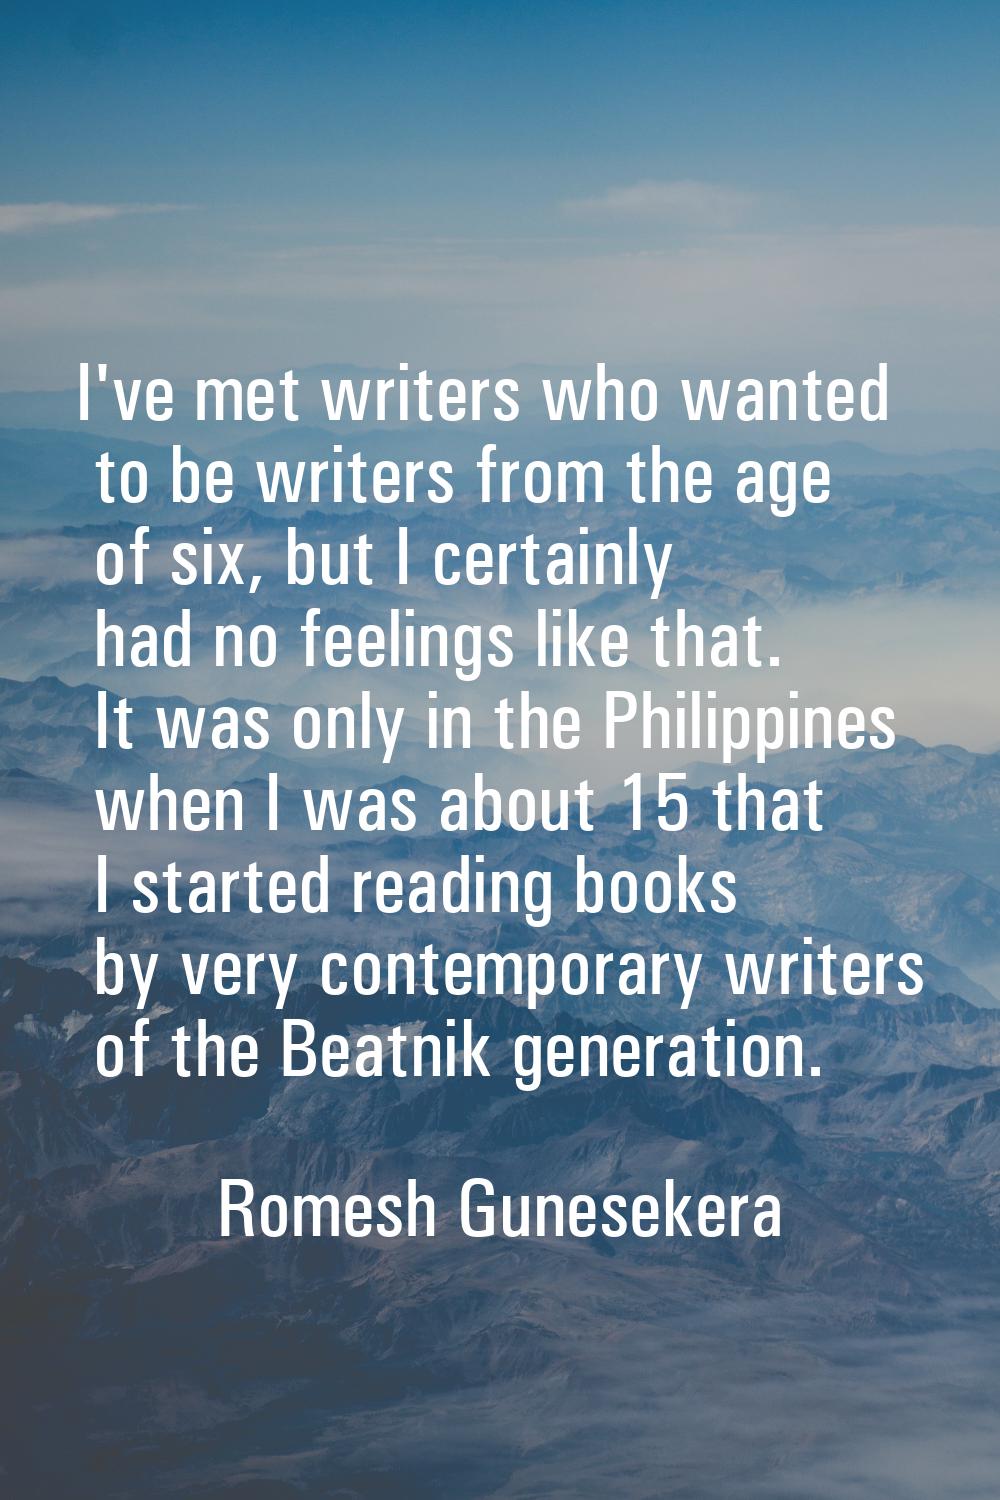 I've met writers who wanted to be writers from the age of six, but I certainly had no feelings like